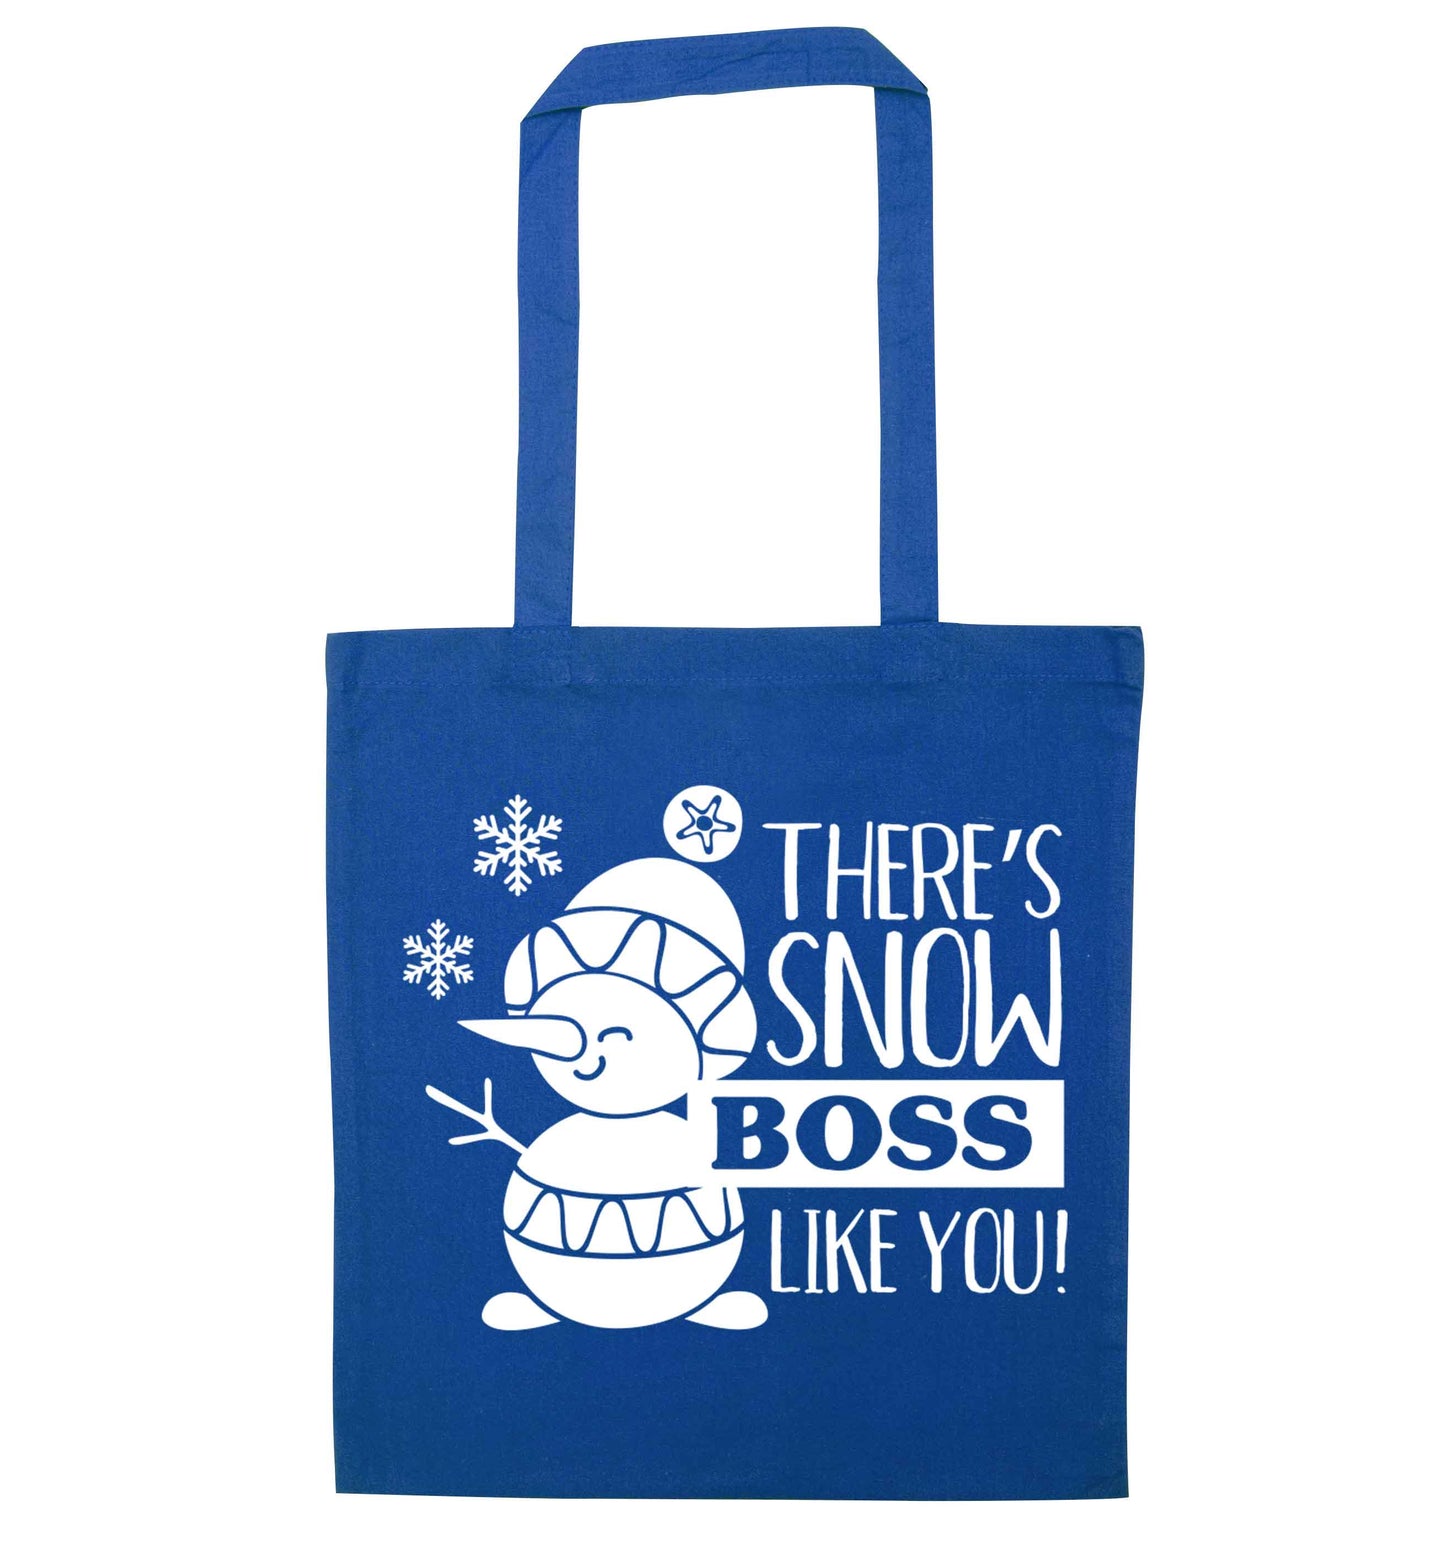 There's snow boss like you blue tote bag